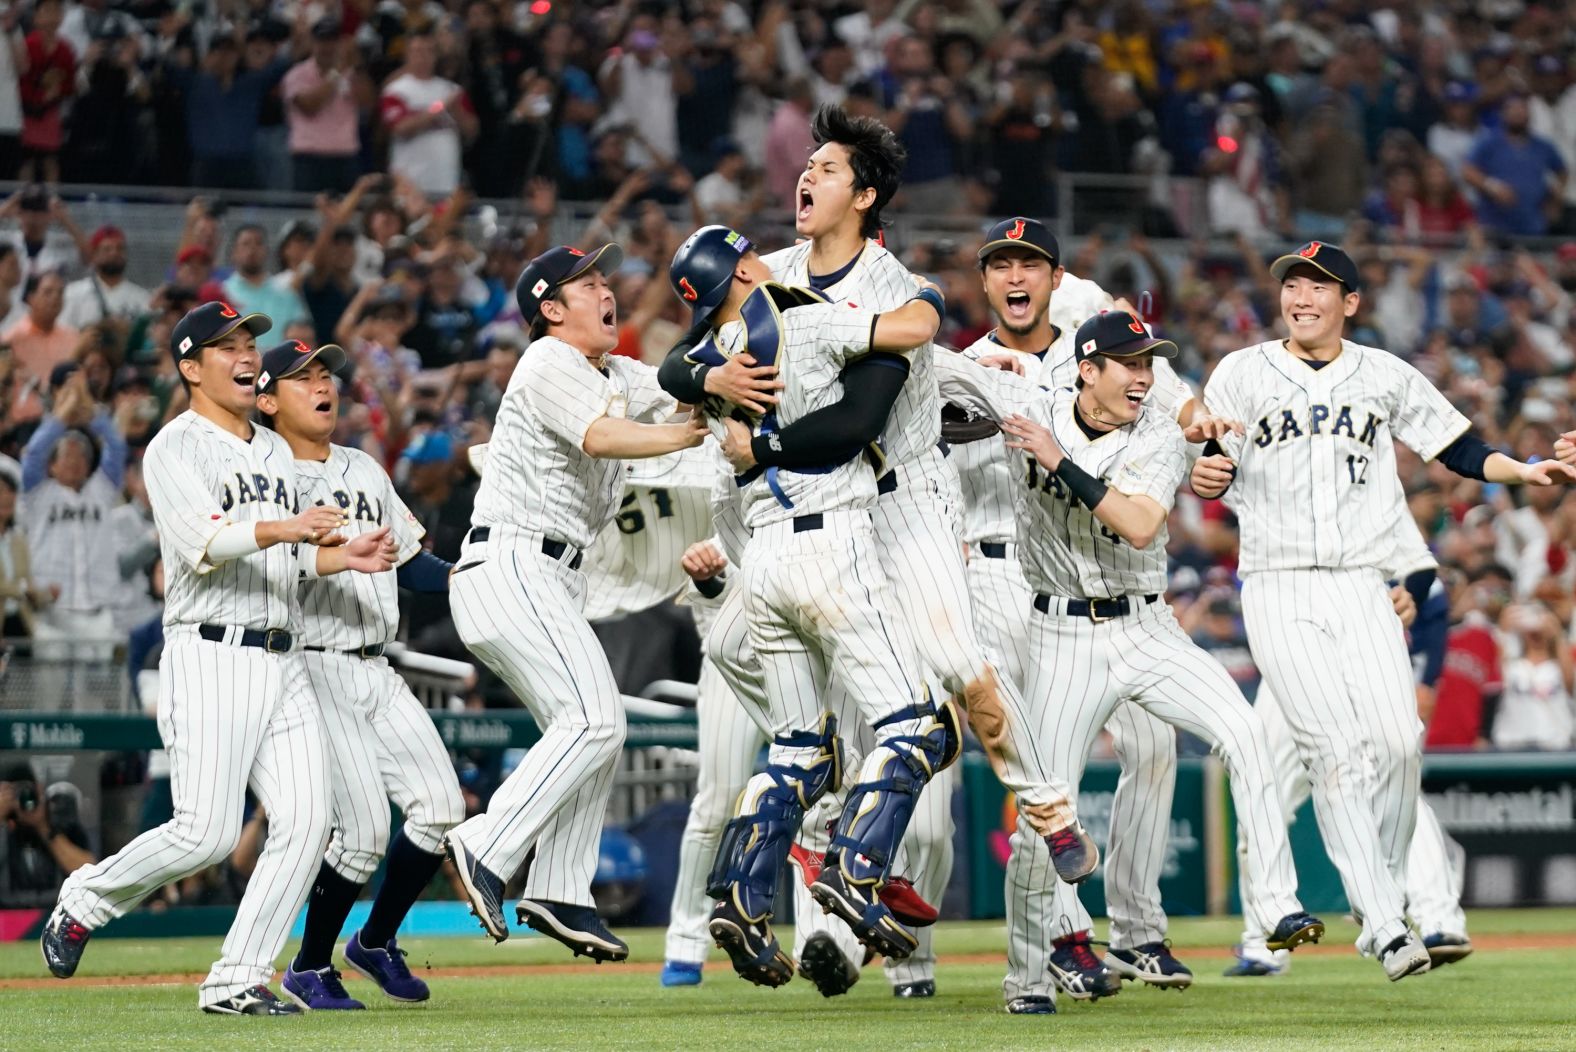 Japanese players celebrate after star Shohei Ohtani struck out Mike Trout to defeat Team USA in <a href="https://www.cnn.com/2023/03/21/sport/world-baseball-classic-final-usa-japan-spt-intl/index.html" target="_blank">the championship game of the World Baseball Classic</a> on Tuesday, March 21. It's the third time Japan has won the event.